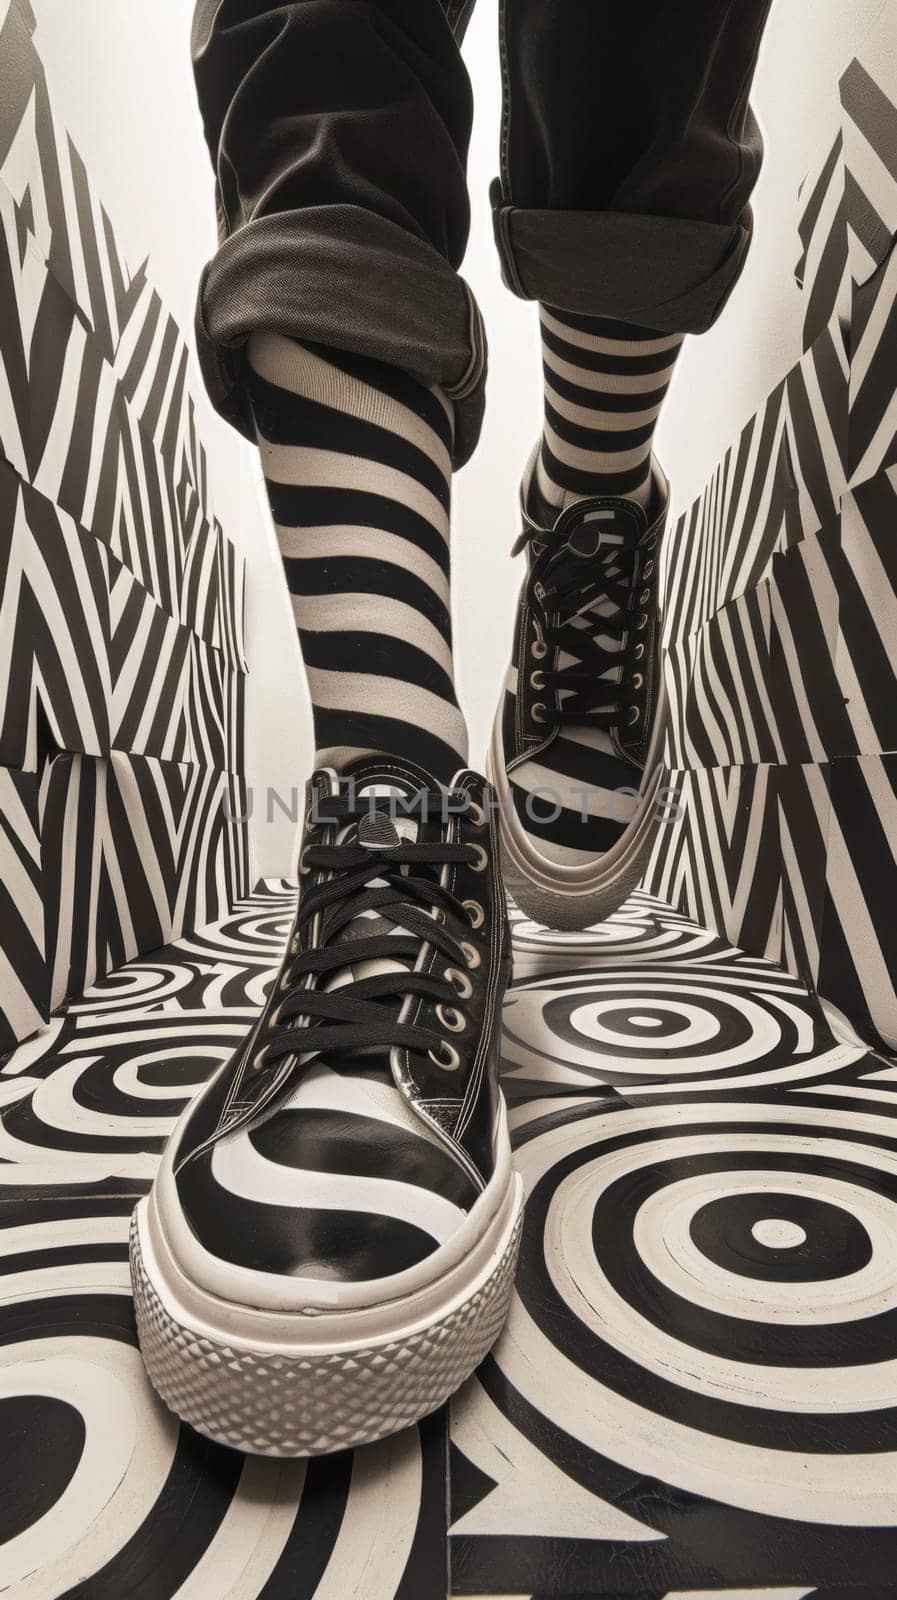 A person wearing black and white striped socks on a patterned floor, AI by starush